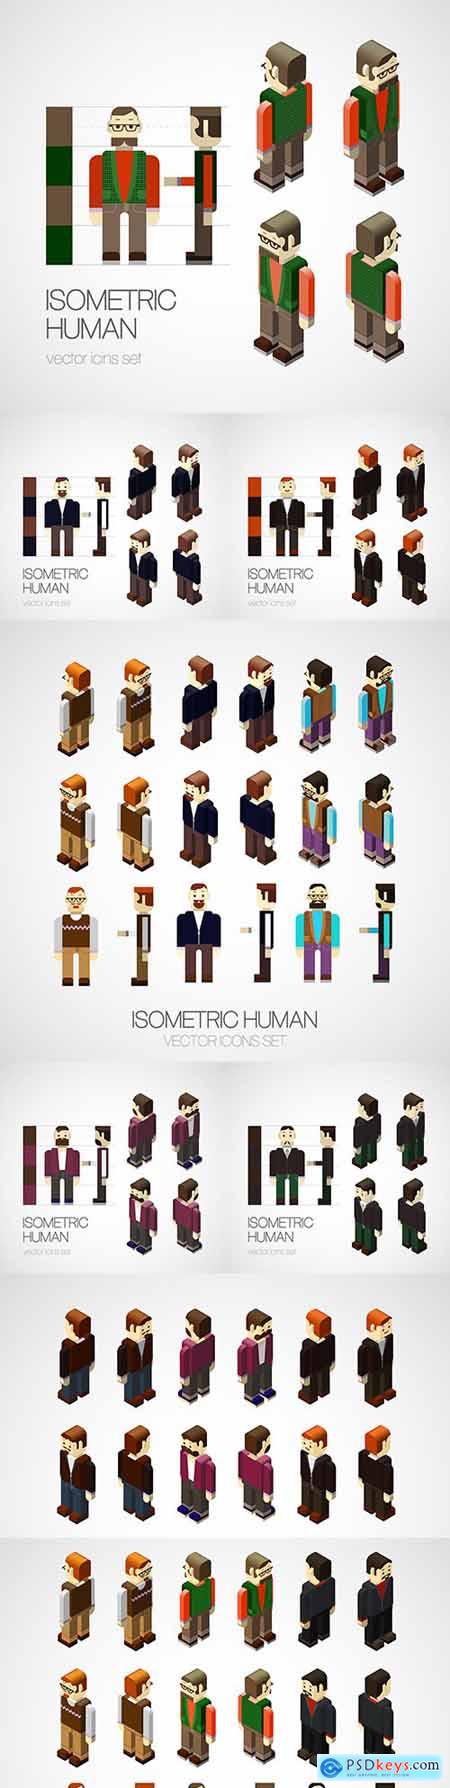 Business people in a strict suit isometric set